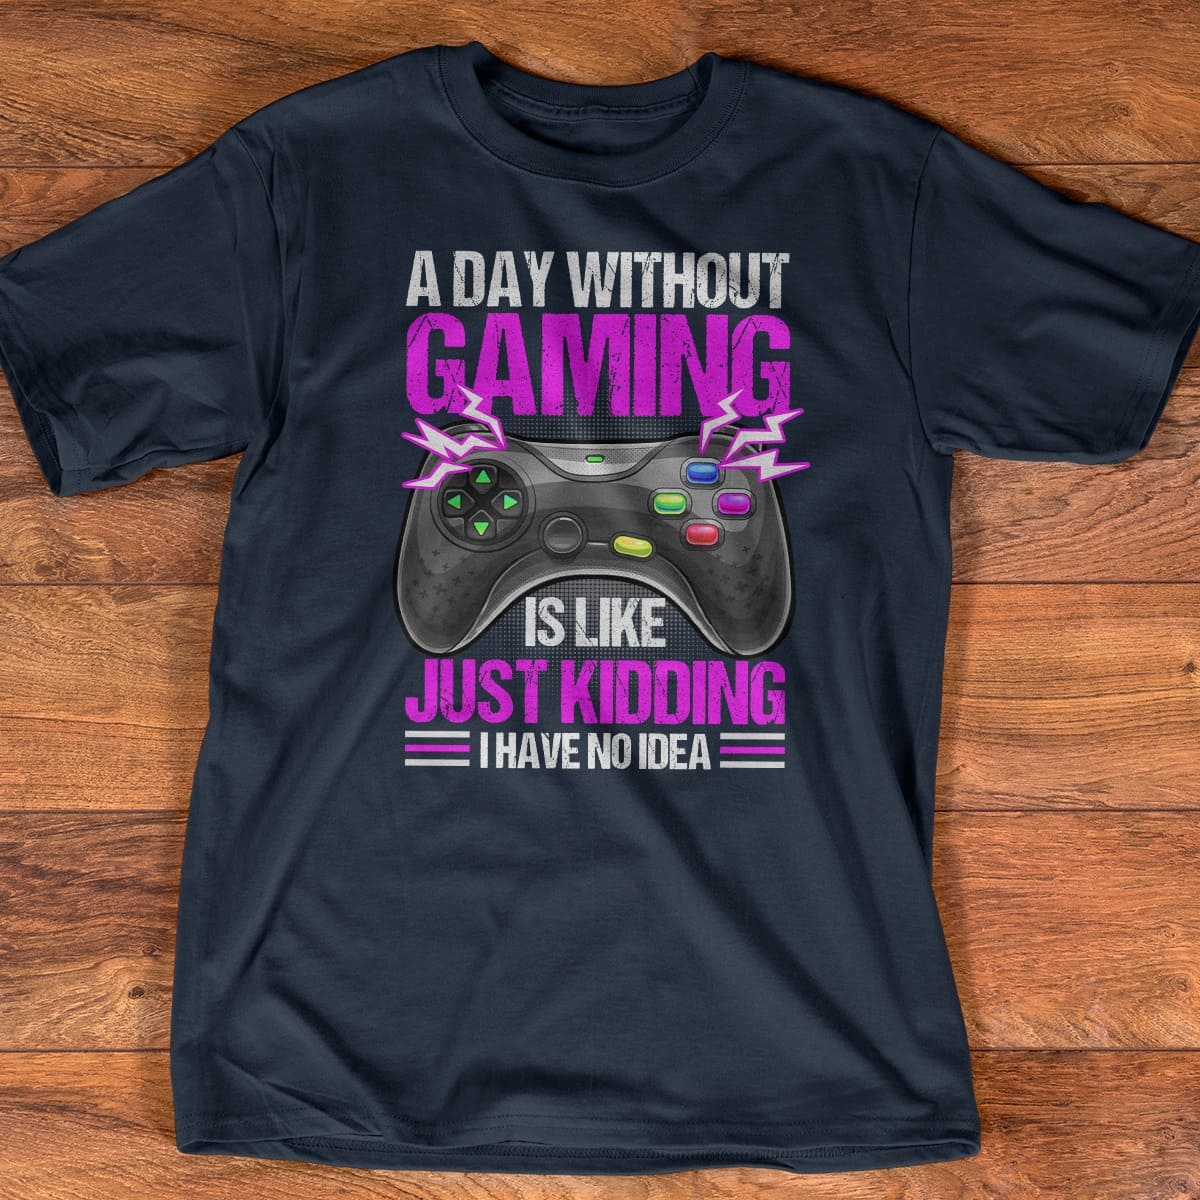 A day without gaming is like just kidding I have no idea - Xbox gear graphic